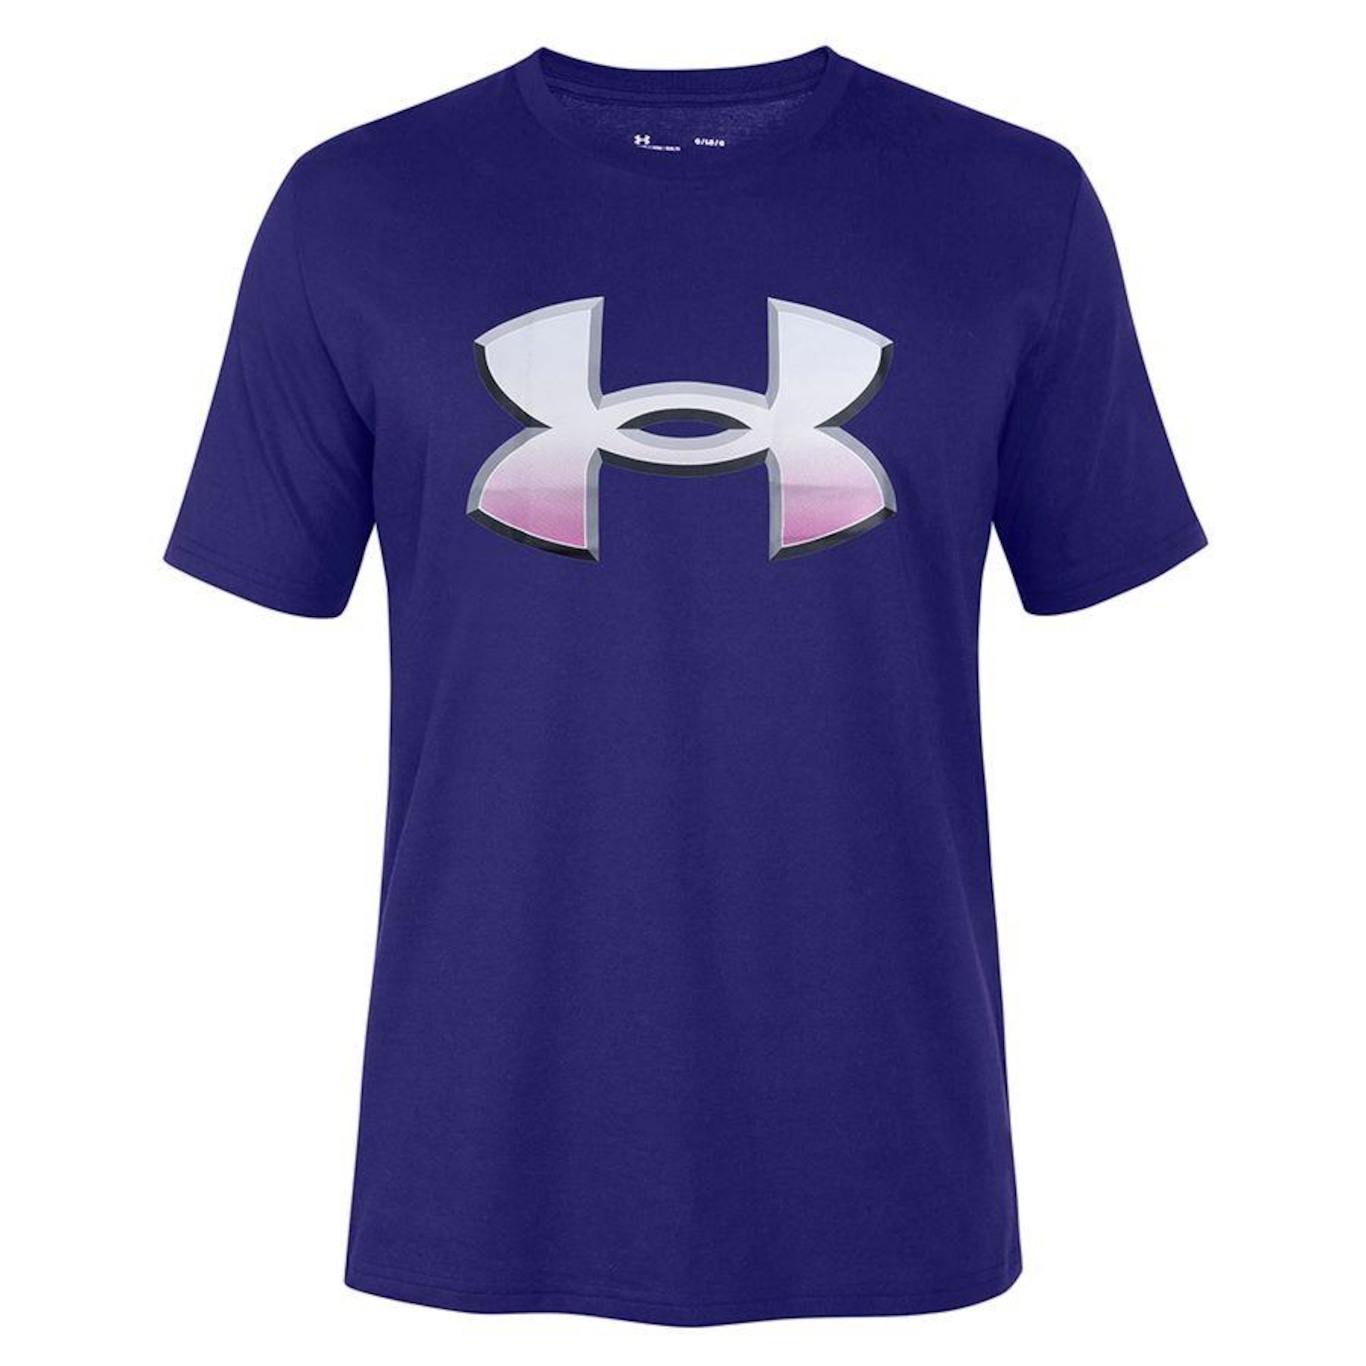 REMERA UNDER ARMOUR TECH GRAPHIC SS MUJER